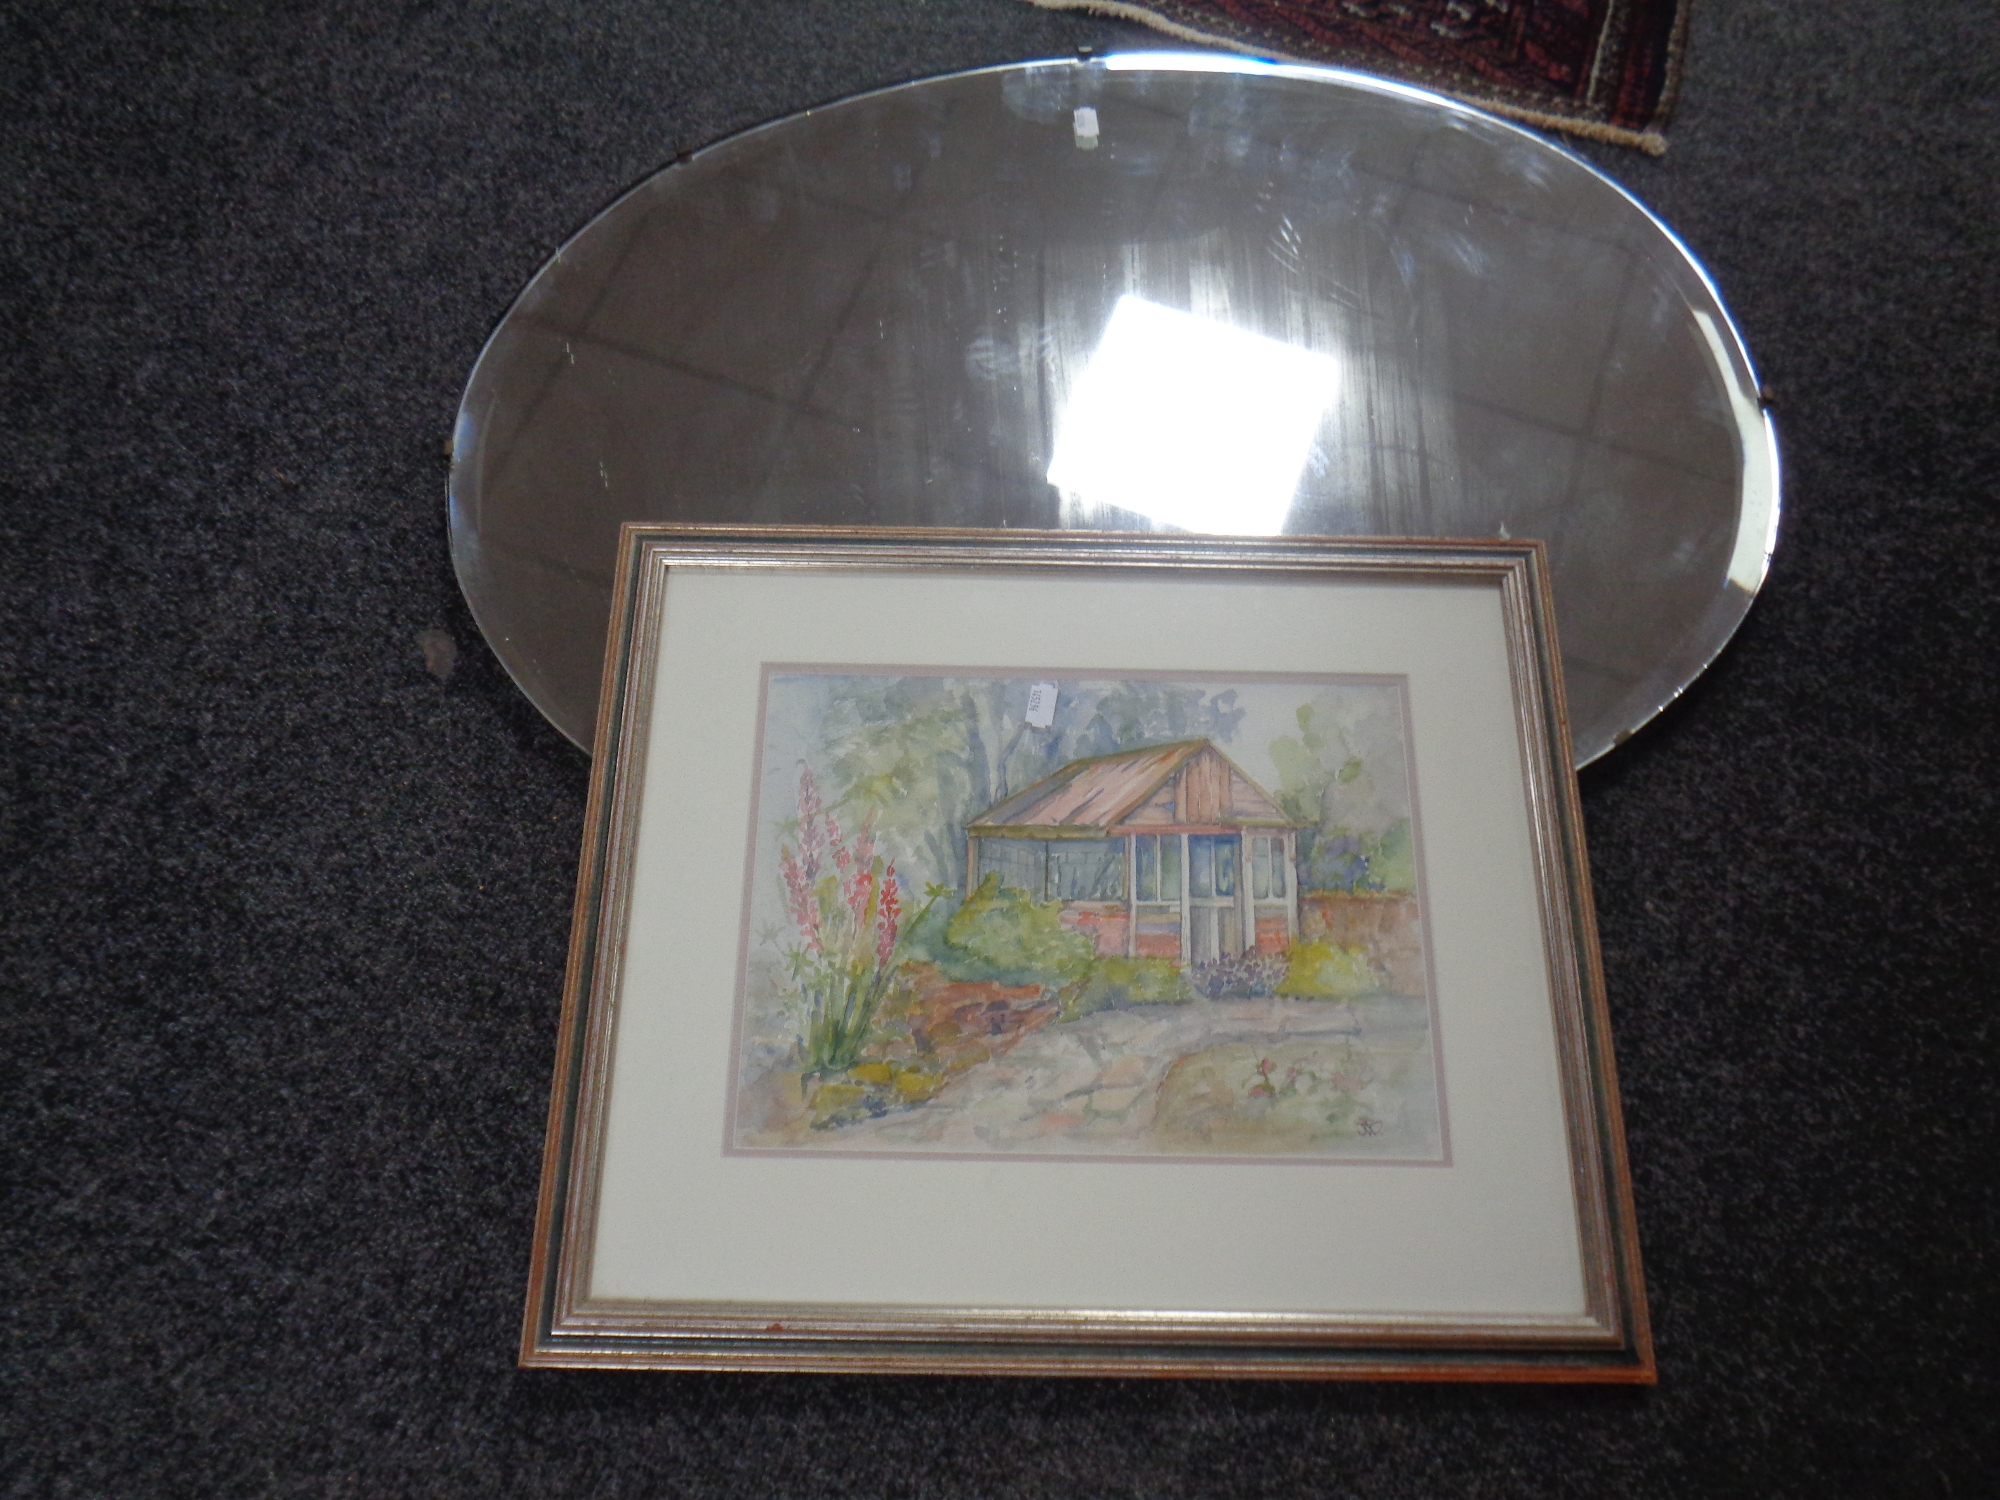 A 20th century oval frameless bevelled mirror together with a watercolour - Garden scene initialled